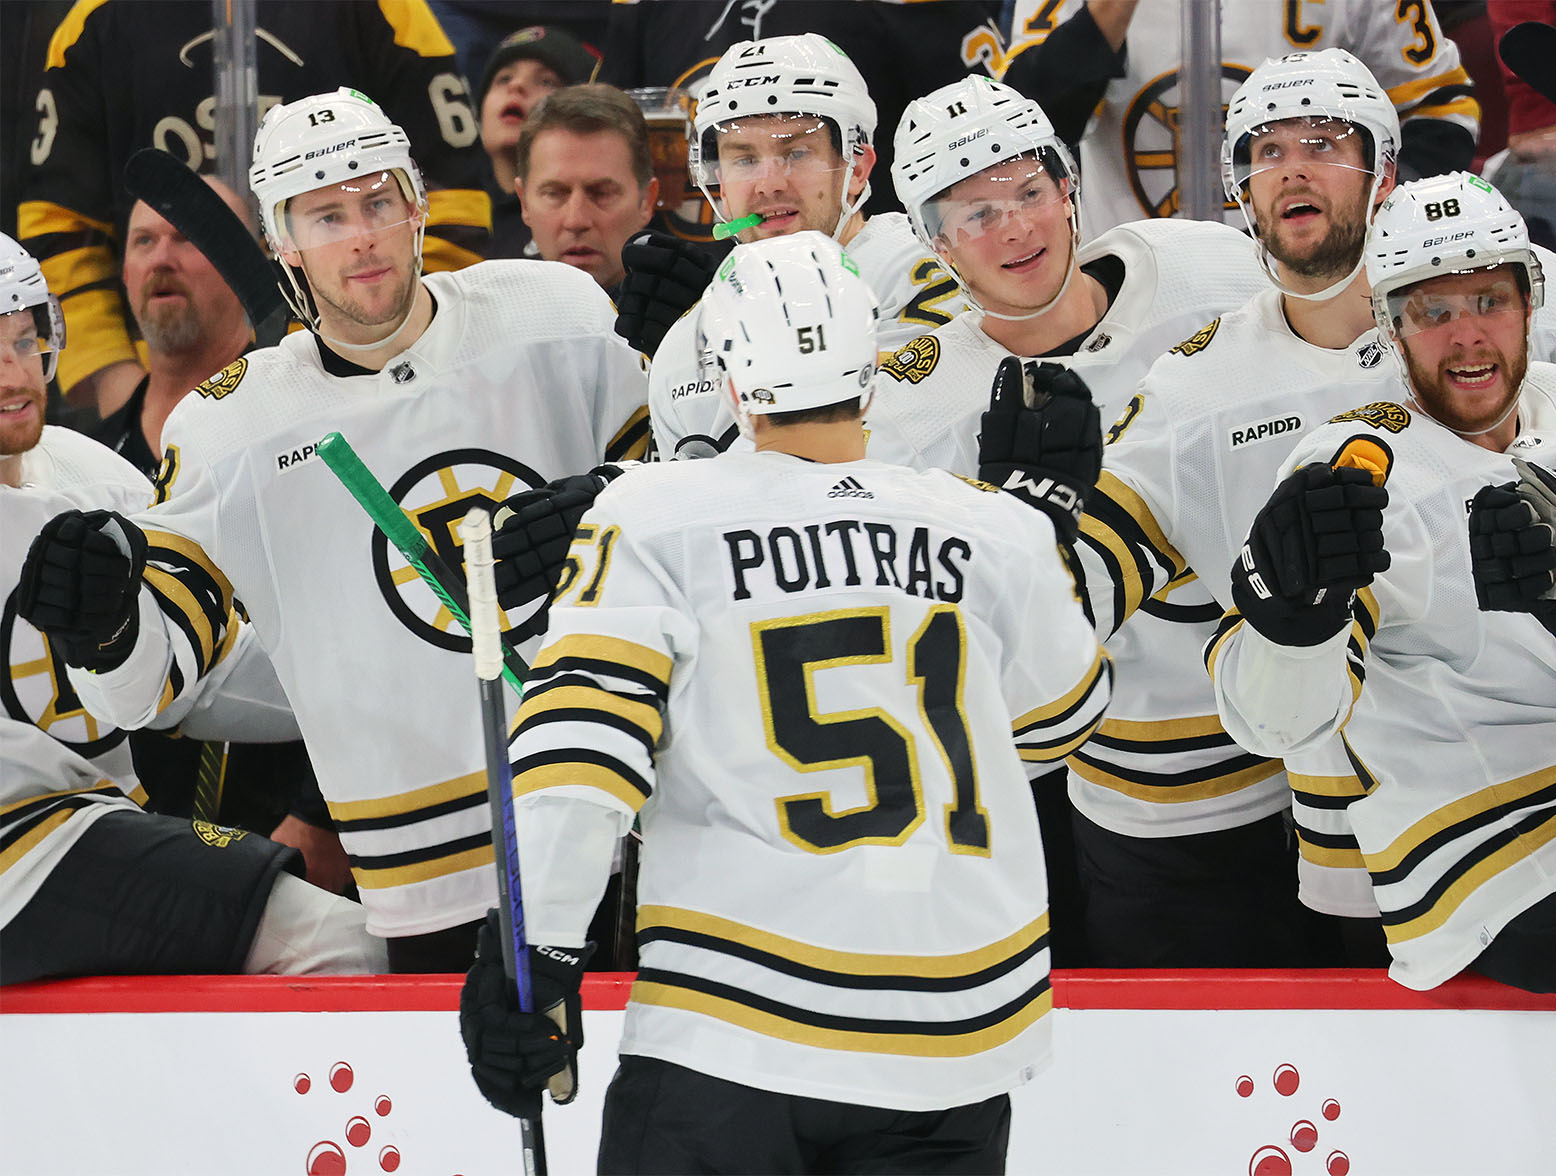 CHICAGO, ILLINOIS - OCTOBER 24: Matthew Poitras #51 of the Boston Bruins fist bumps teammates after scoring a goal against the Chicago Blackhawks during the third period at the United Center on October 24, 2023 in Chicago, Illinois. (Photo by Michael Reaves/Getty Images)